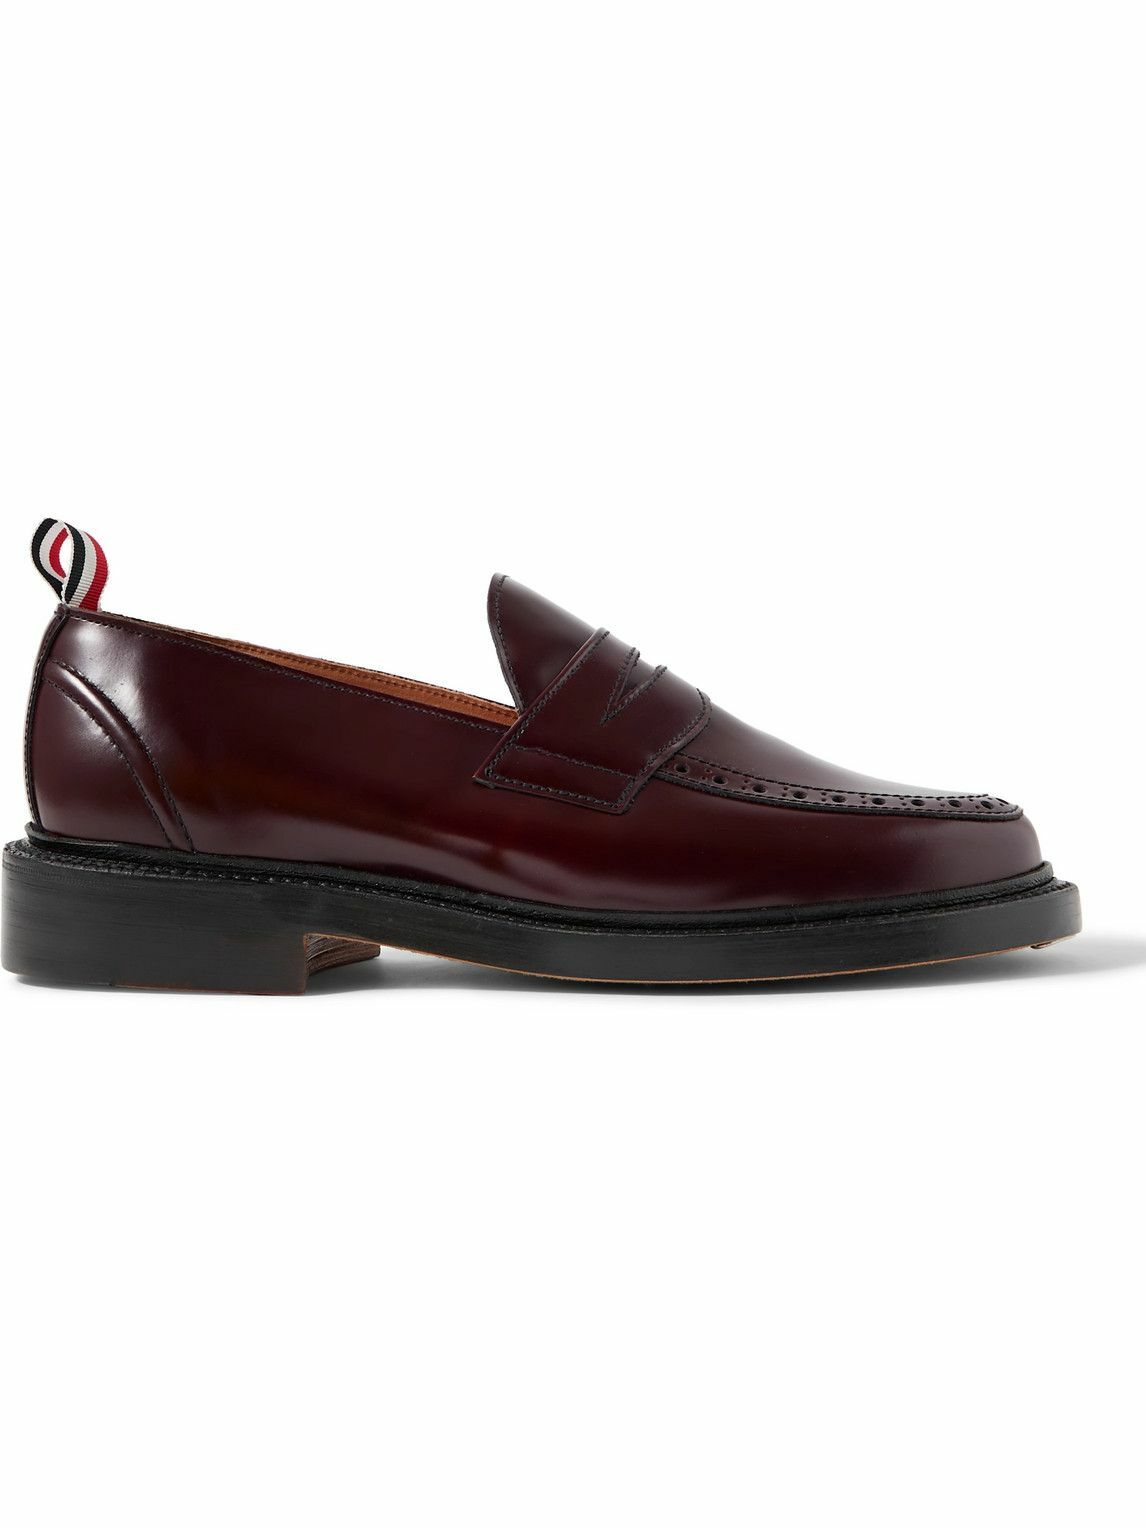 Photo: Thom Browne - Grosgrain-Trimmed Glossed-Leather Penny Loafers - Burgundy